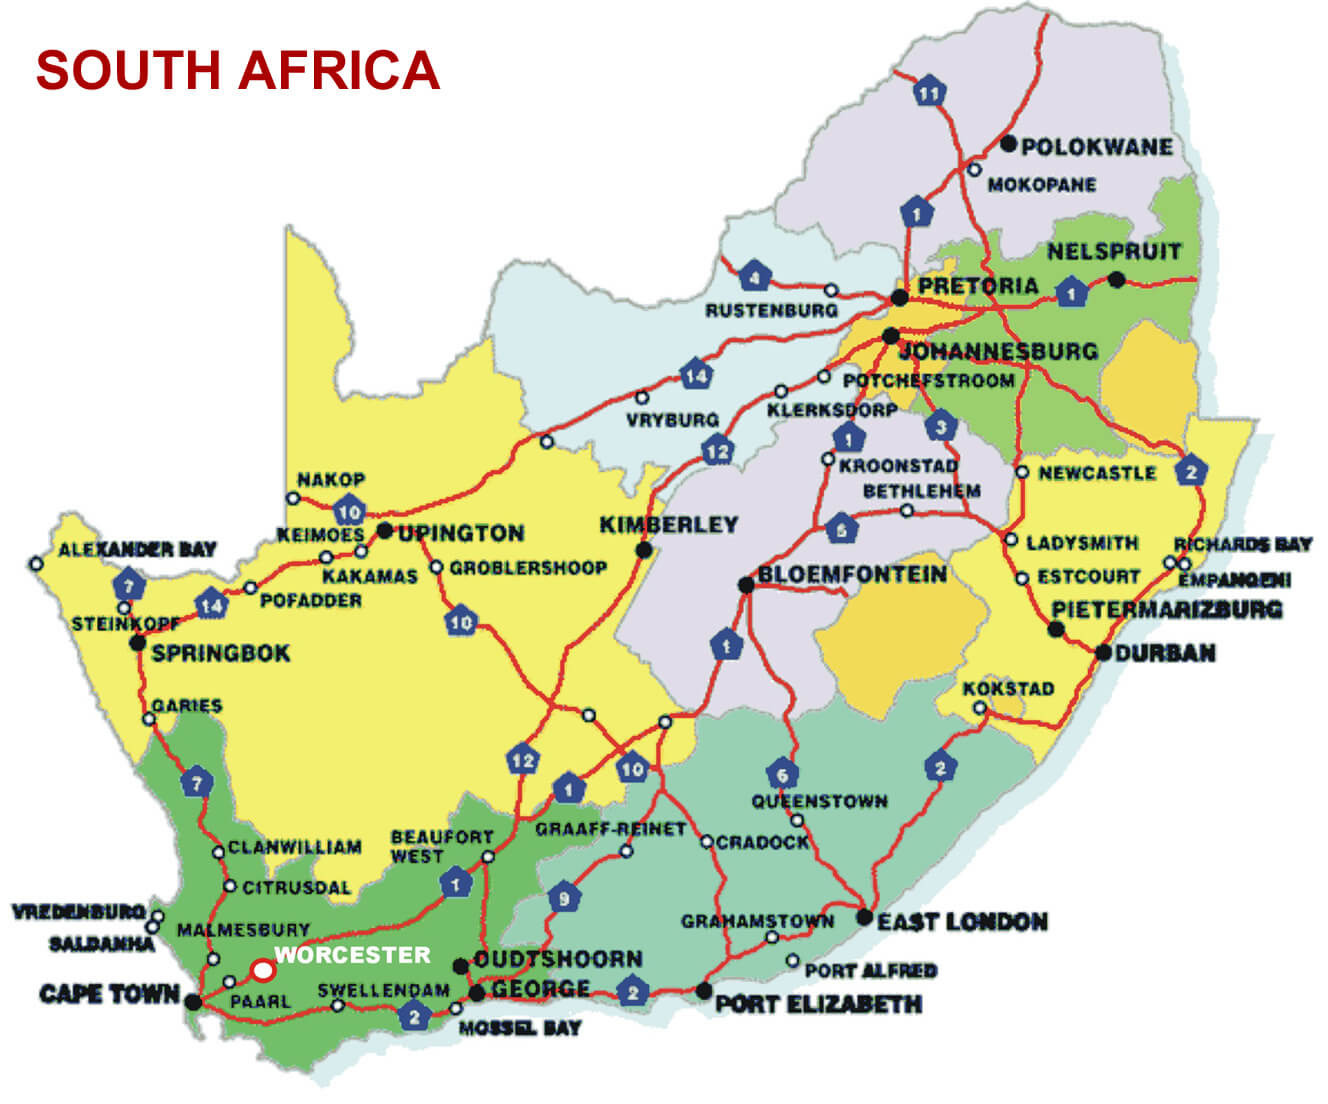 south africa cities map